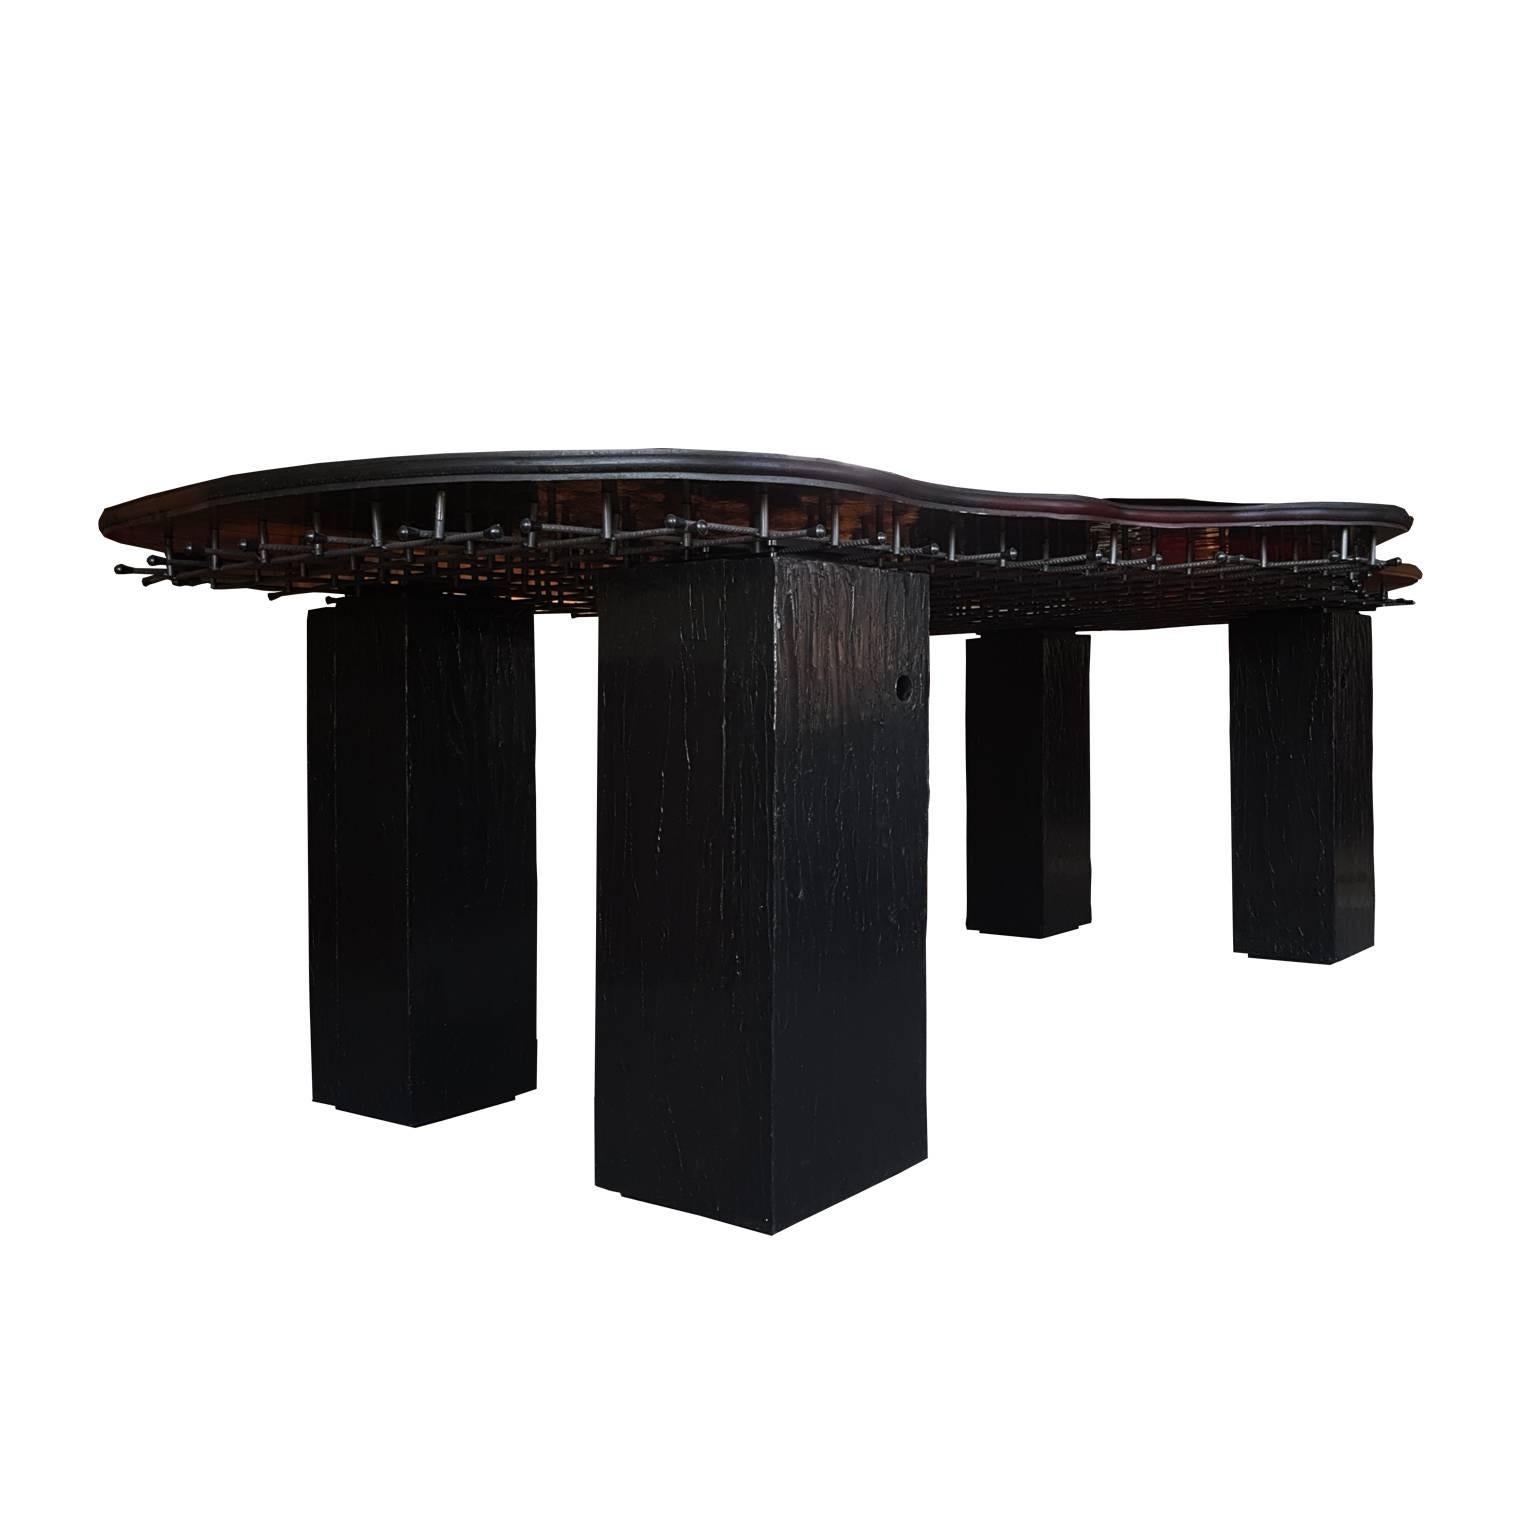 Gaetano Pesce Italian Dining Table with Resin Top and Black Wood Legs For Sale 4